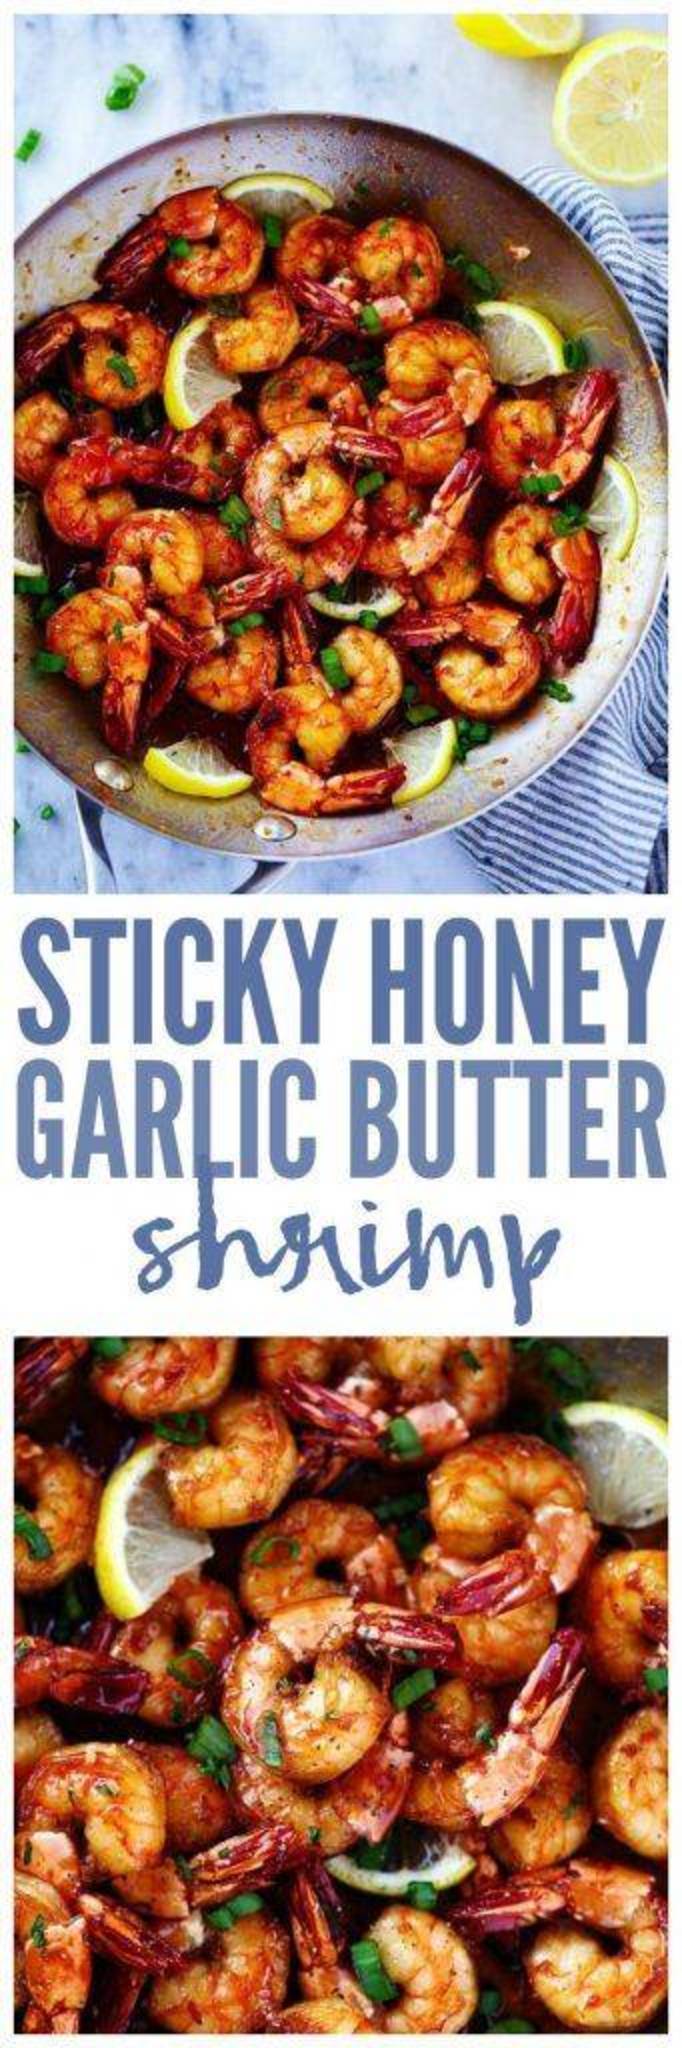 Meal Master pickle and garlic recipes.